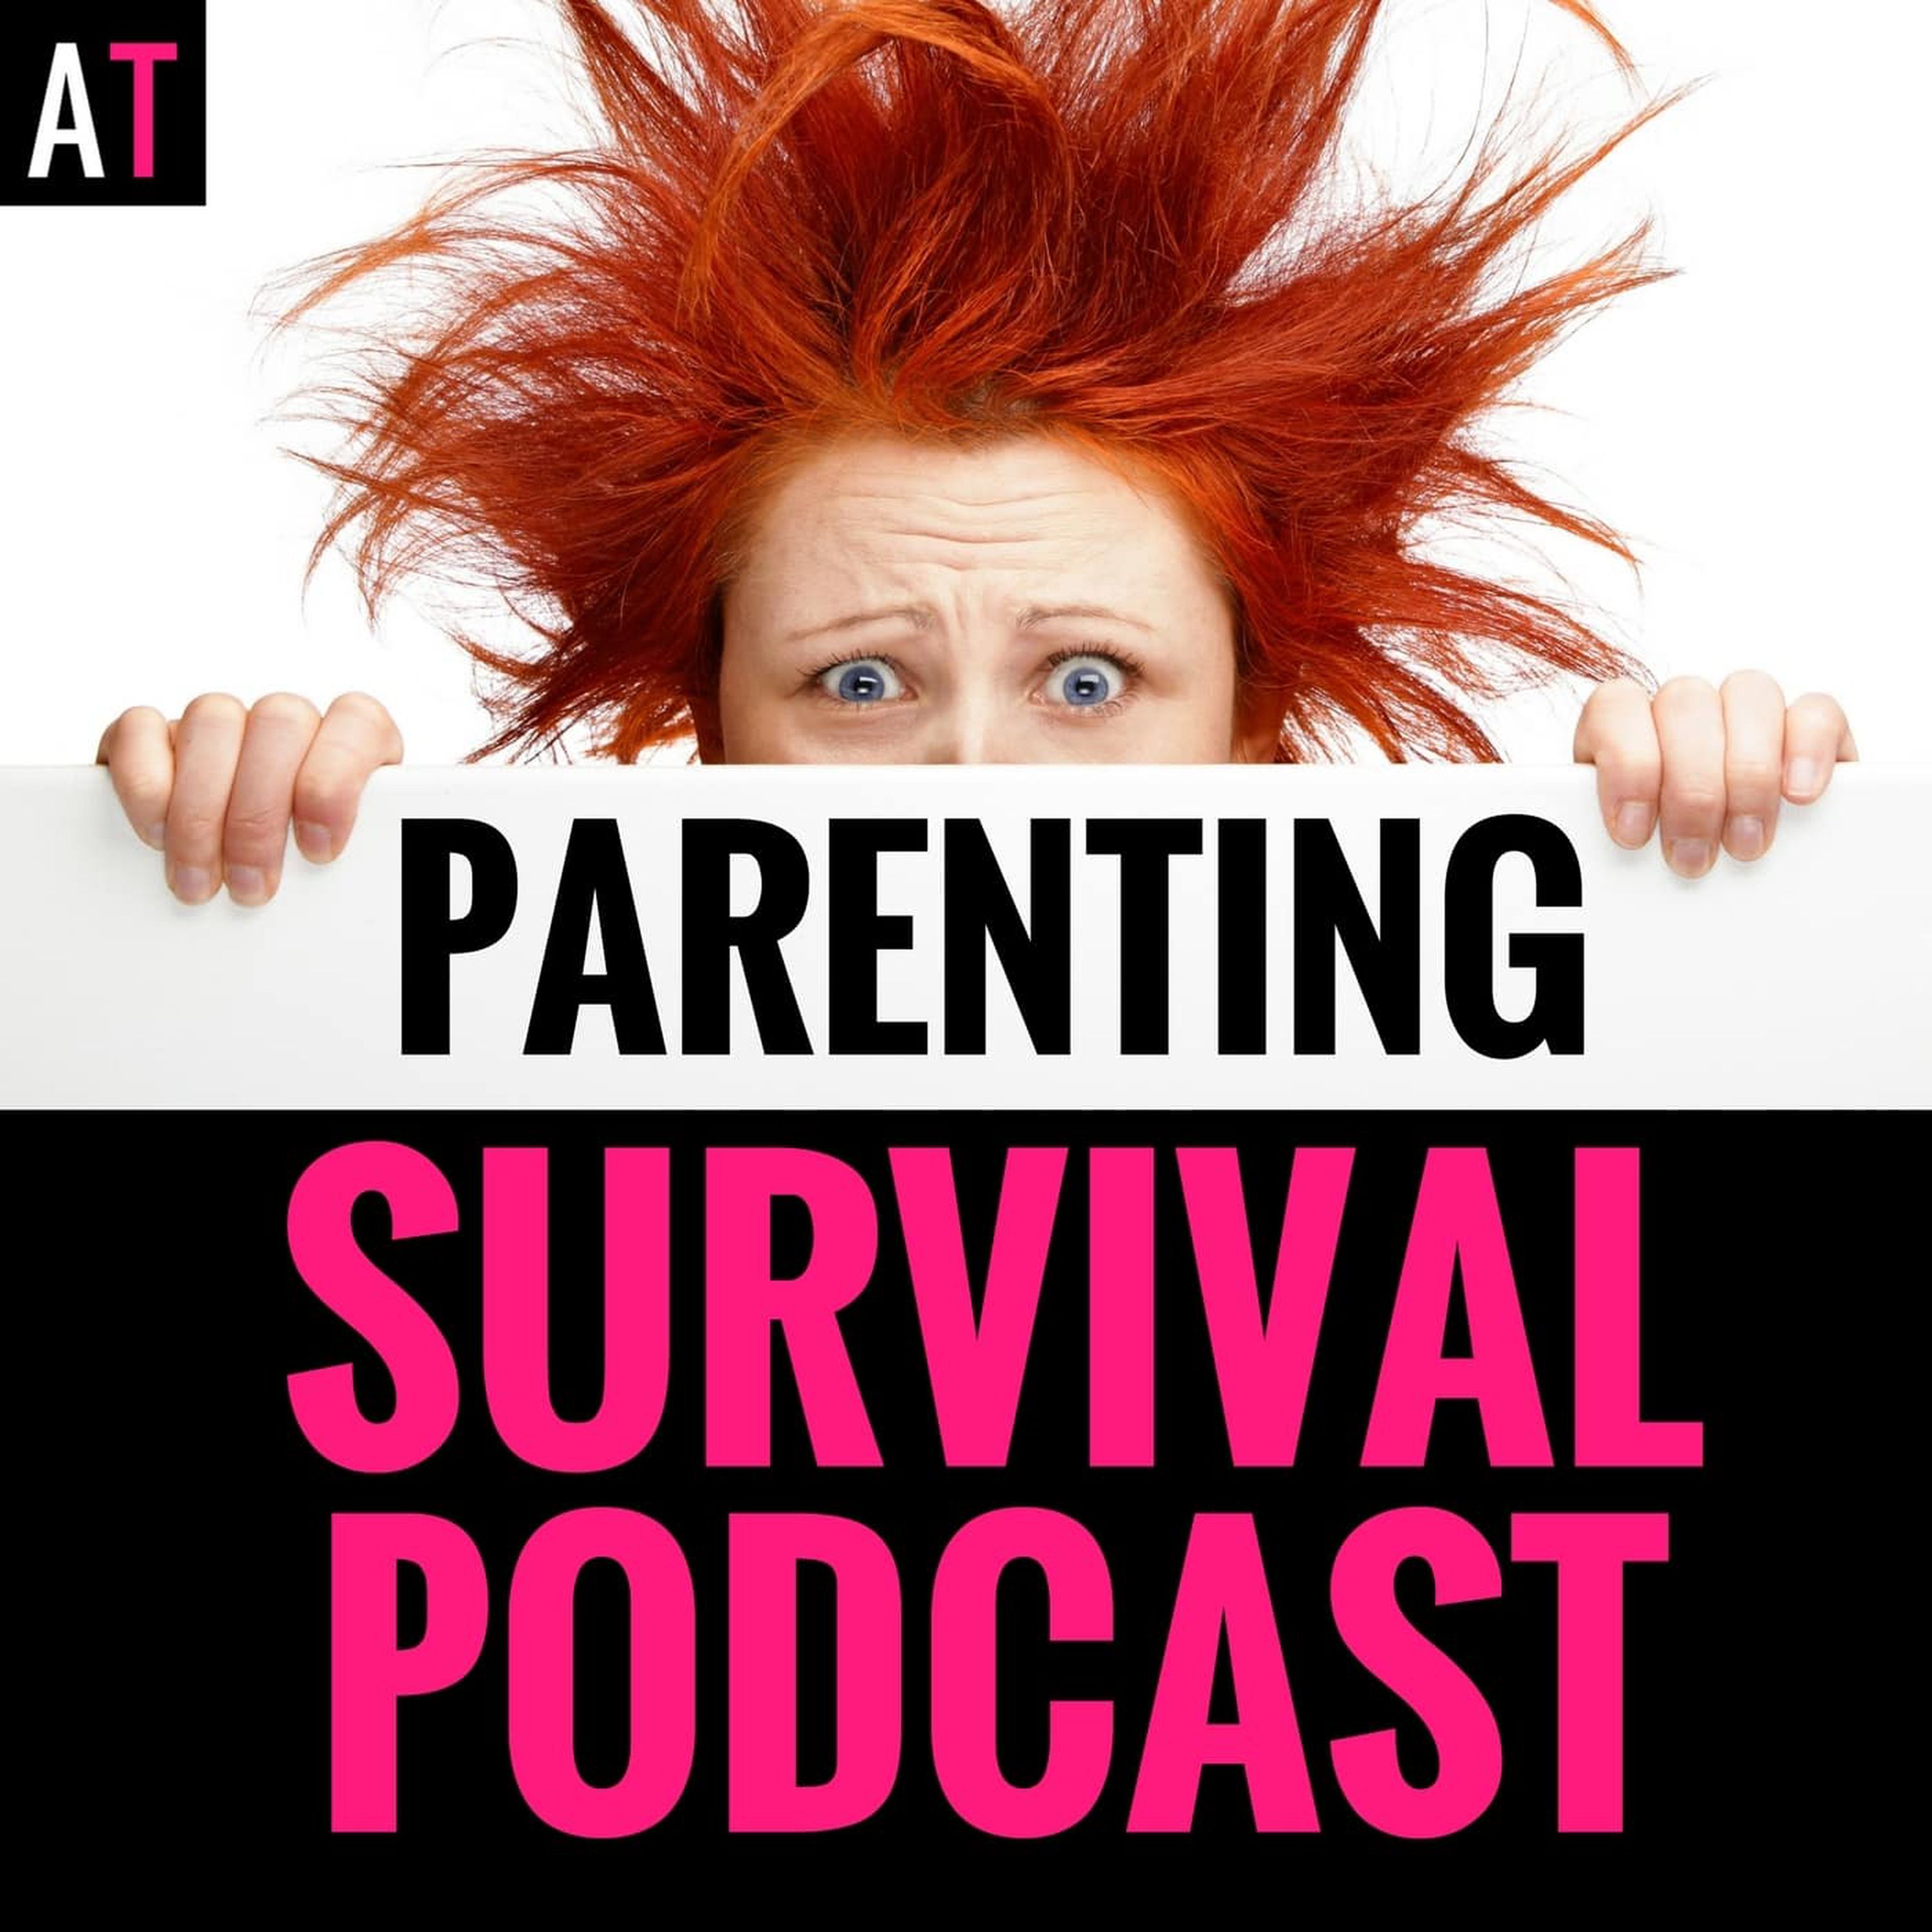 PSP 043: Do You Blame Yourself for Your Child’s Anxiety and OCD? Why That’s not Good for You or Your Child.